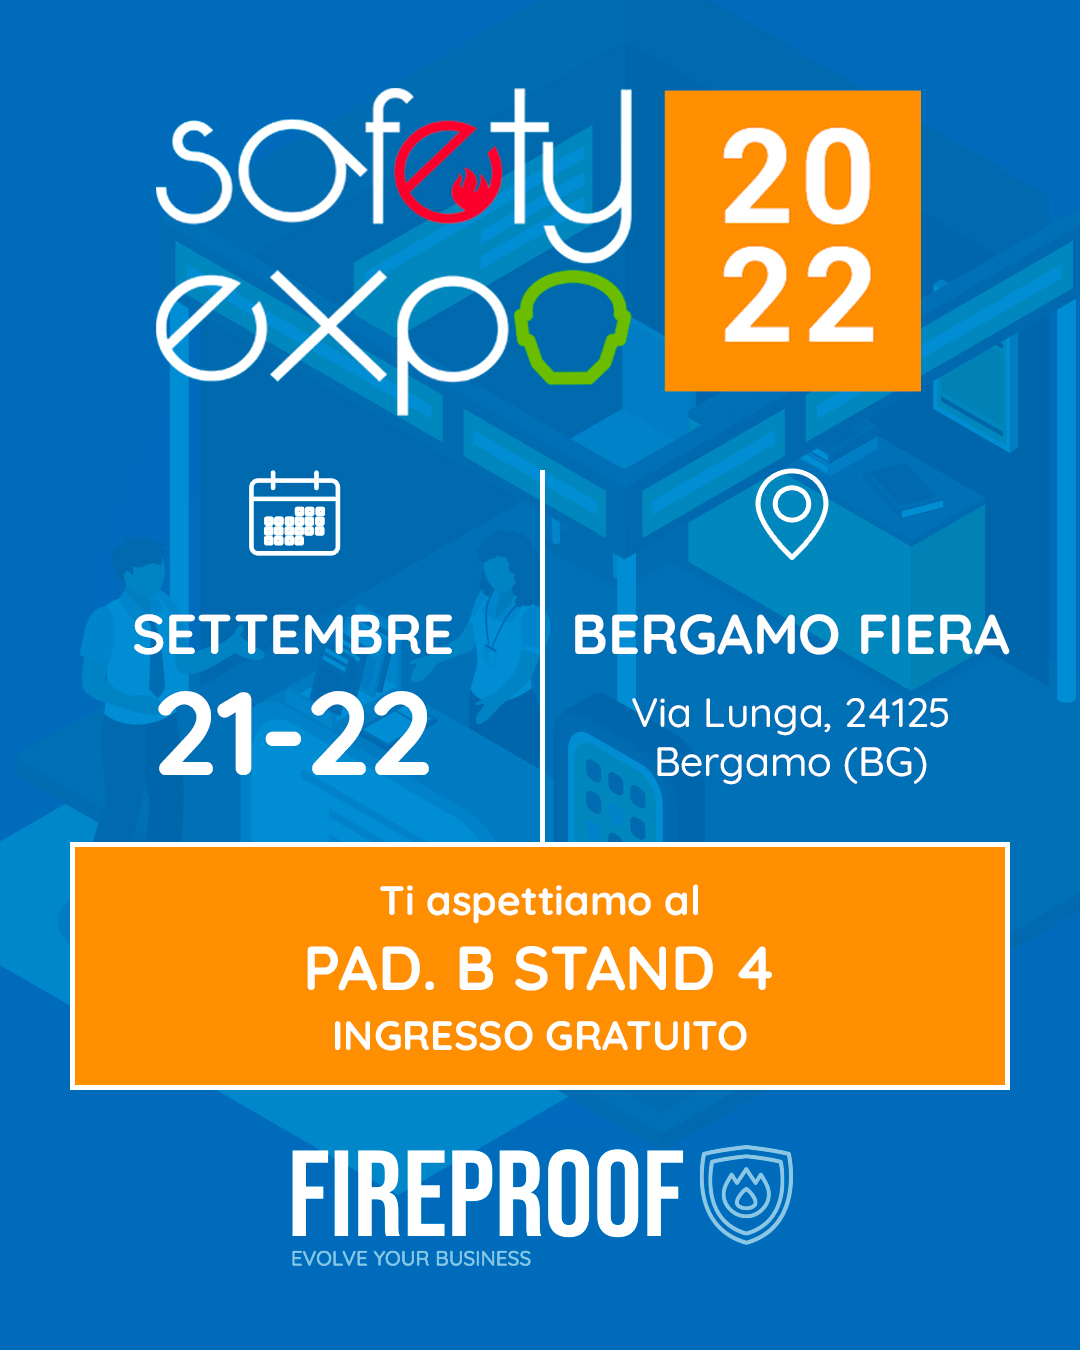 pop-up-safety-expo-2022